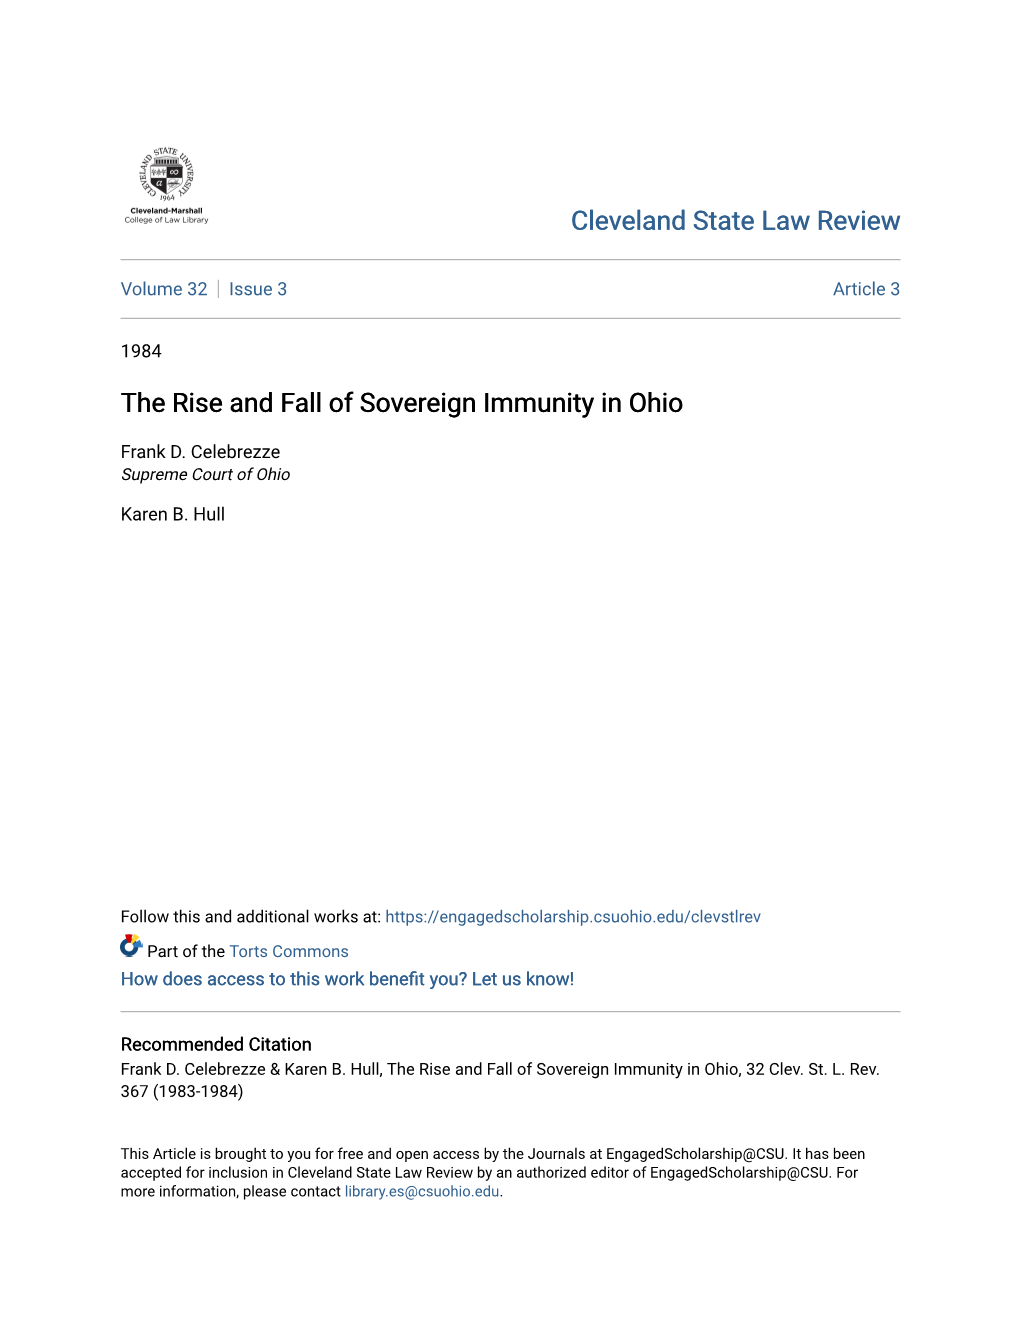 The Rise and Fall of Sovereign Immunity in Ohio